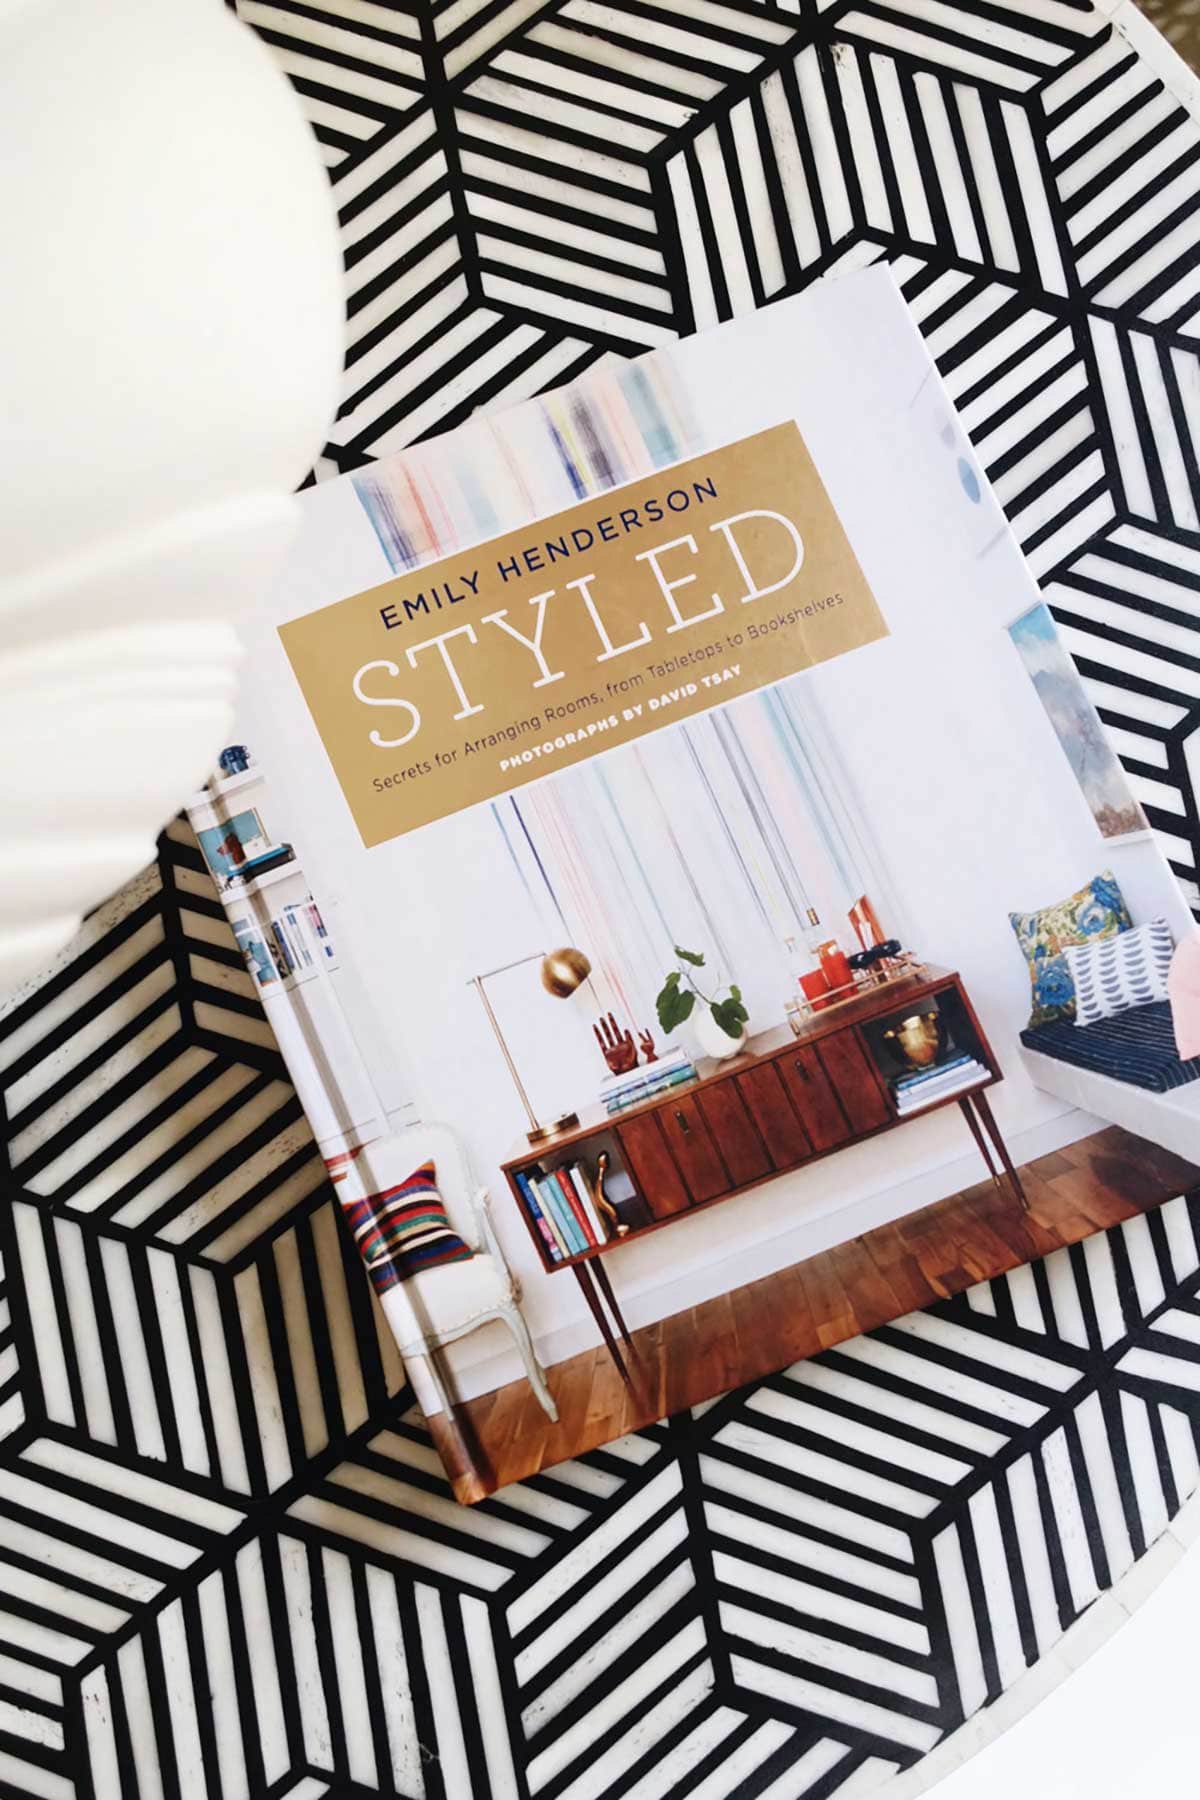 one of the best decor books is Styled by Emily Henderson